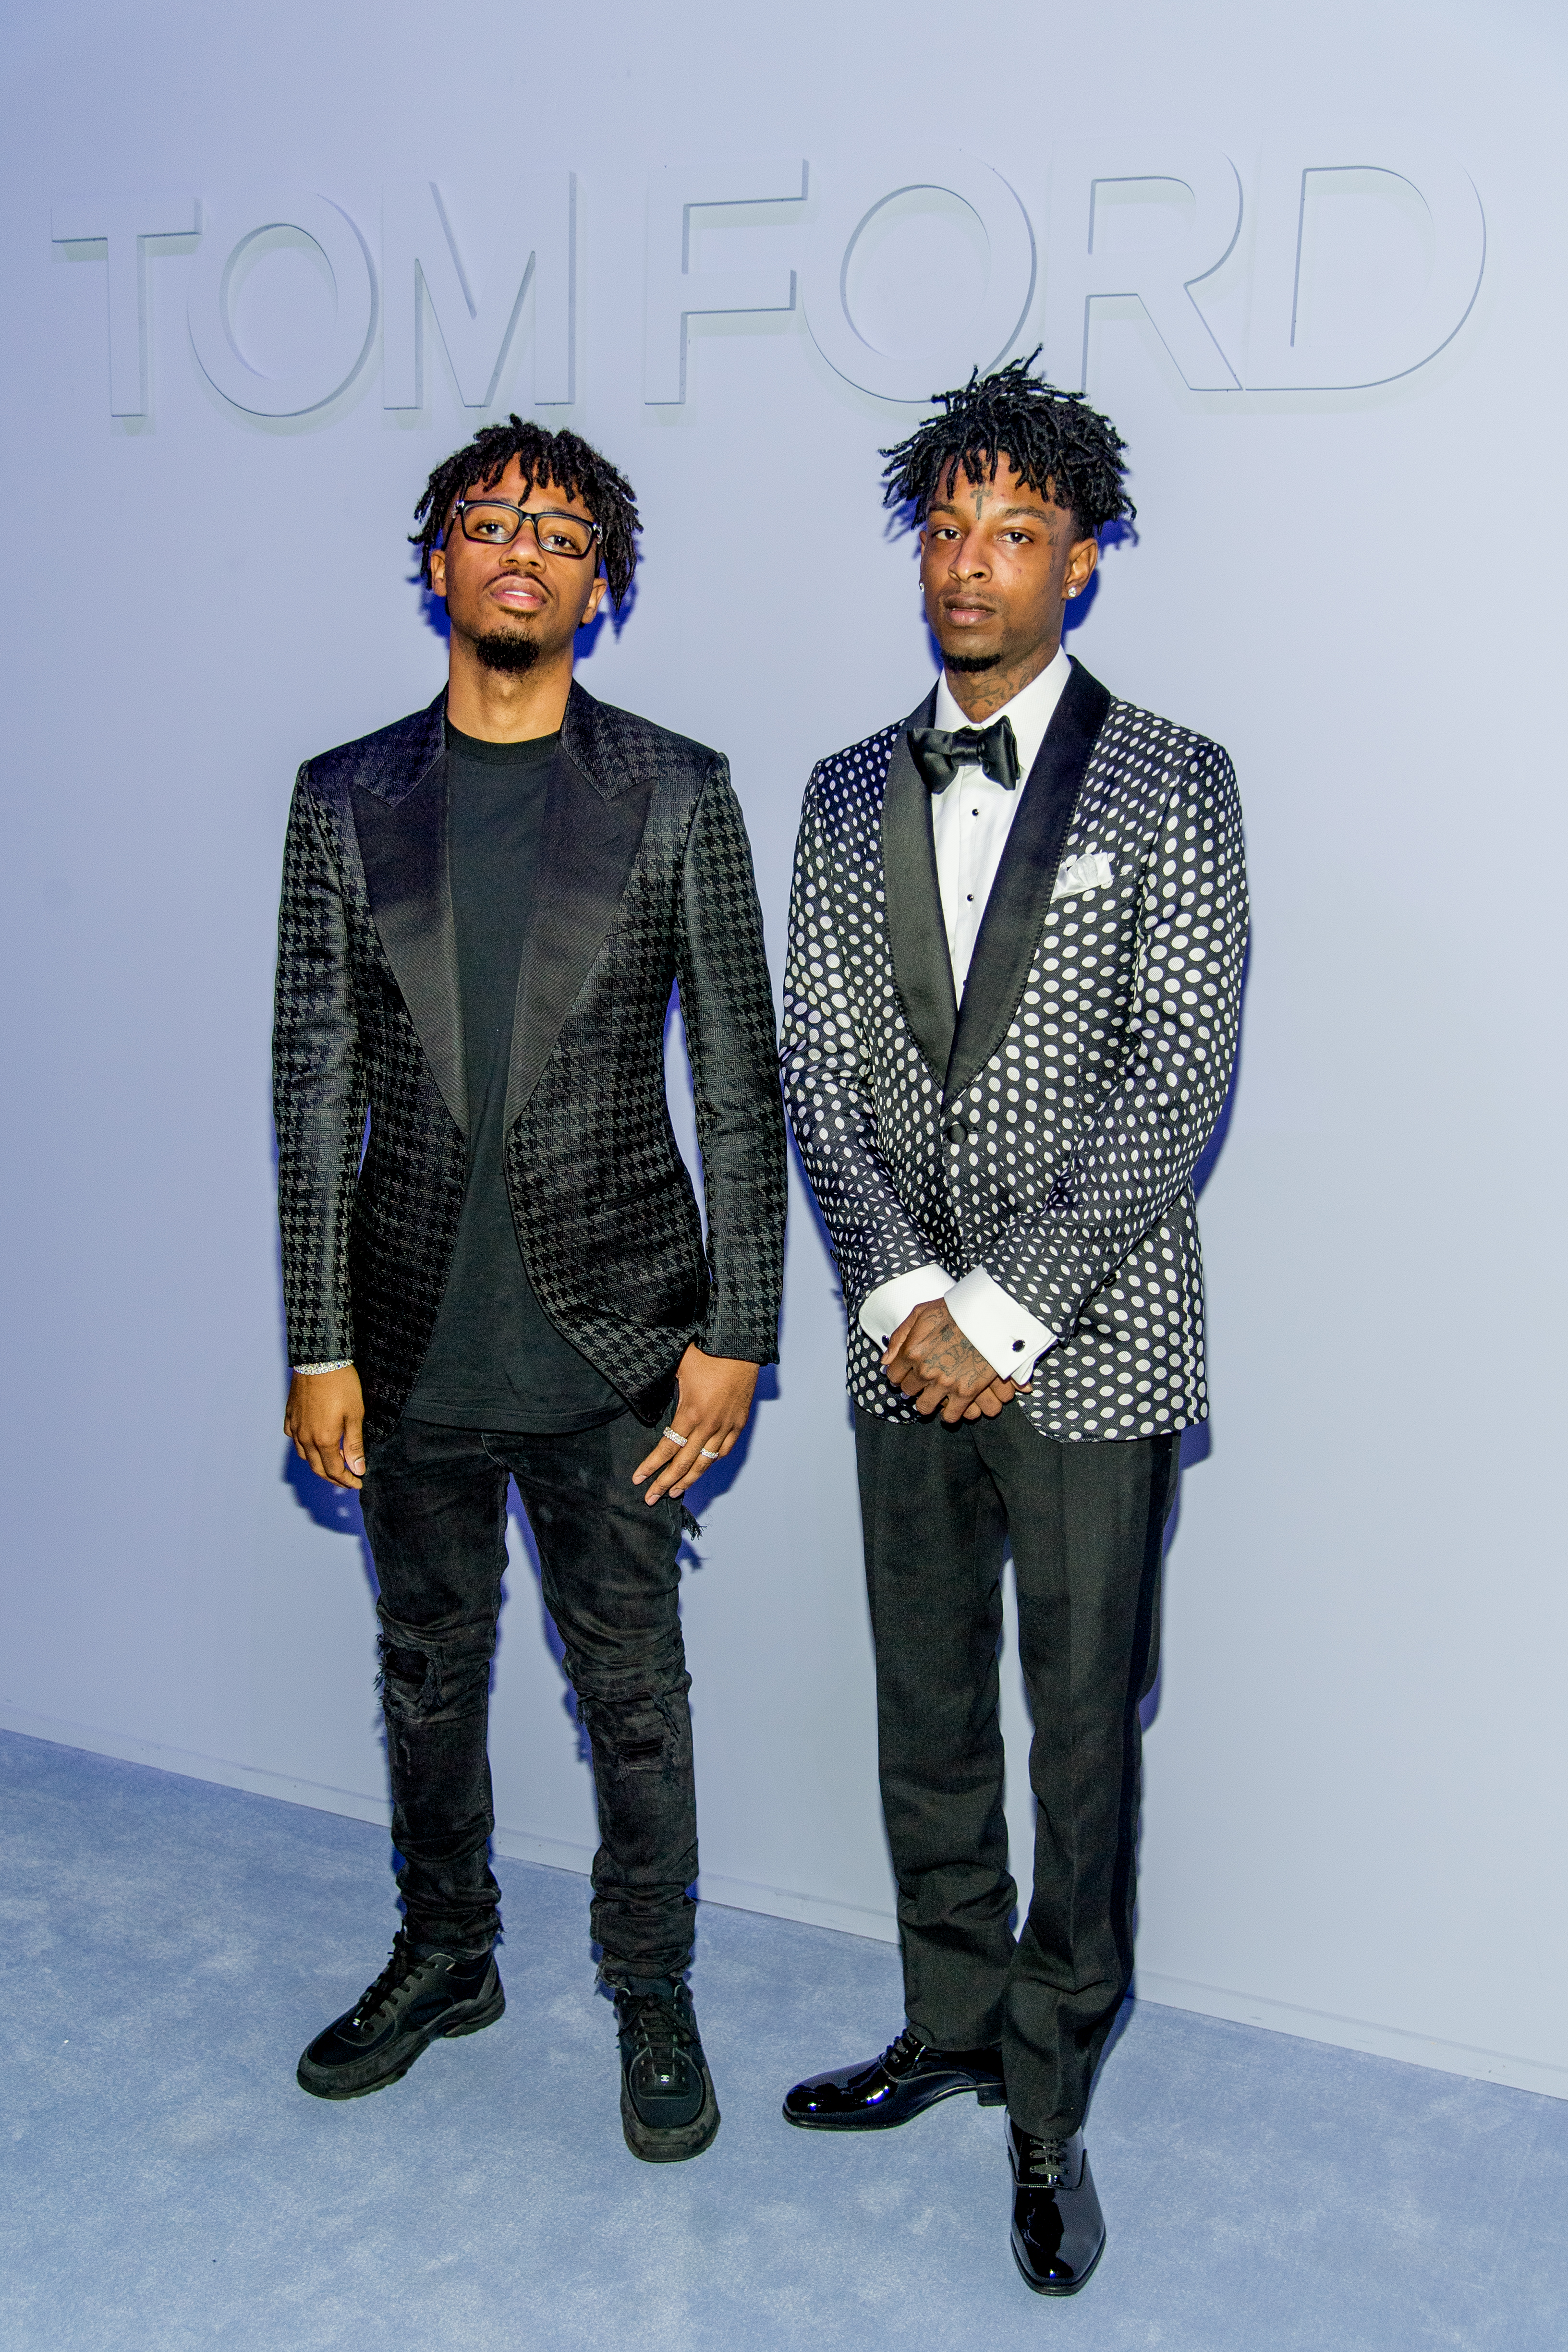 21 Savage Gets Ready for the Tom Ford Fall 2020 Show in LA - PAPER Magazine